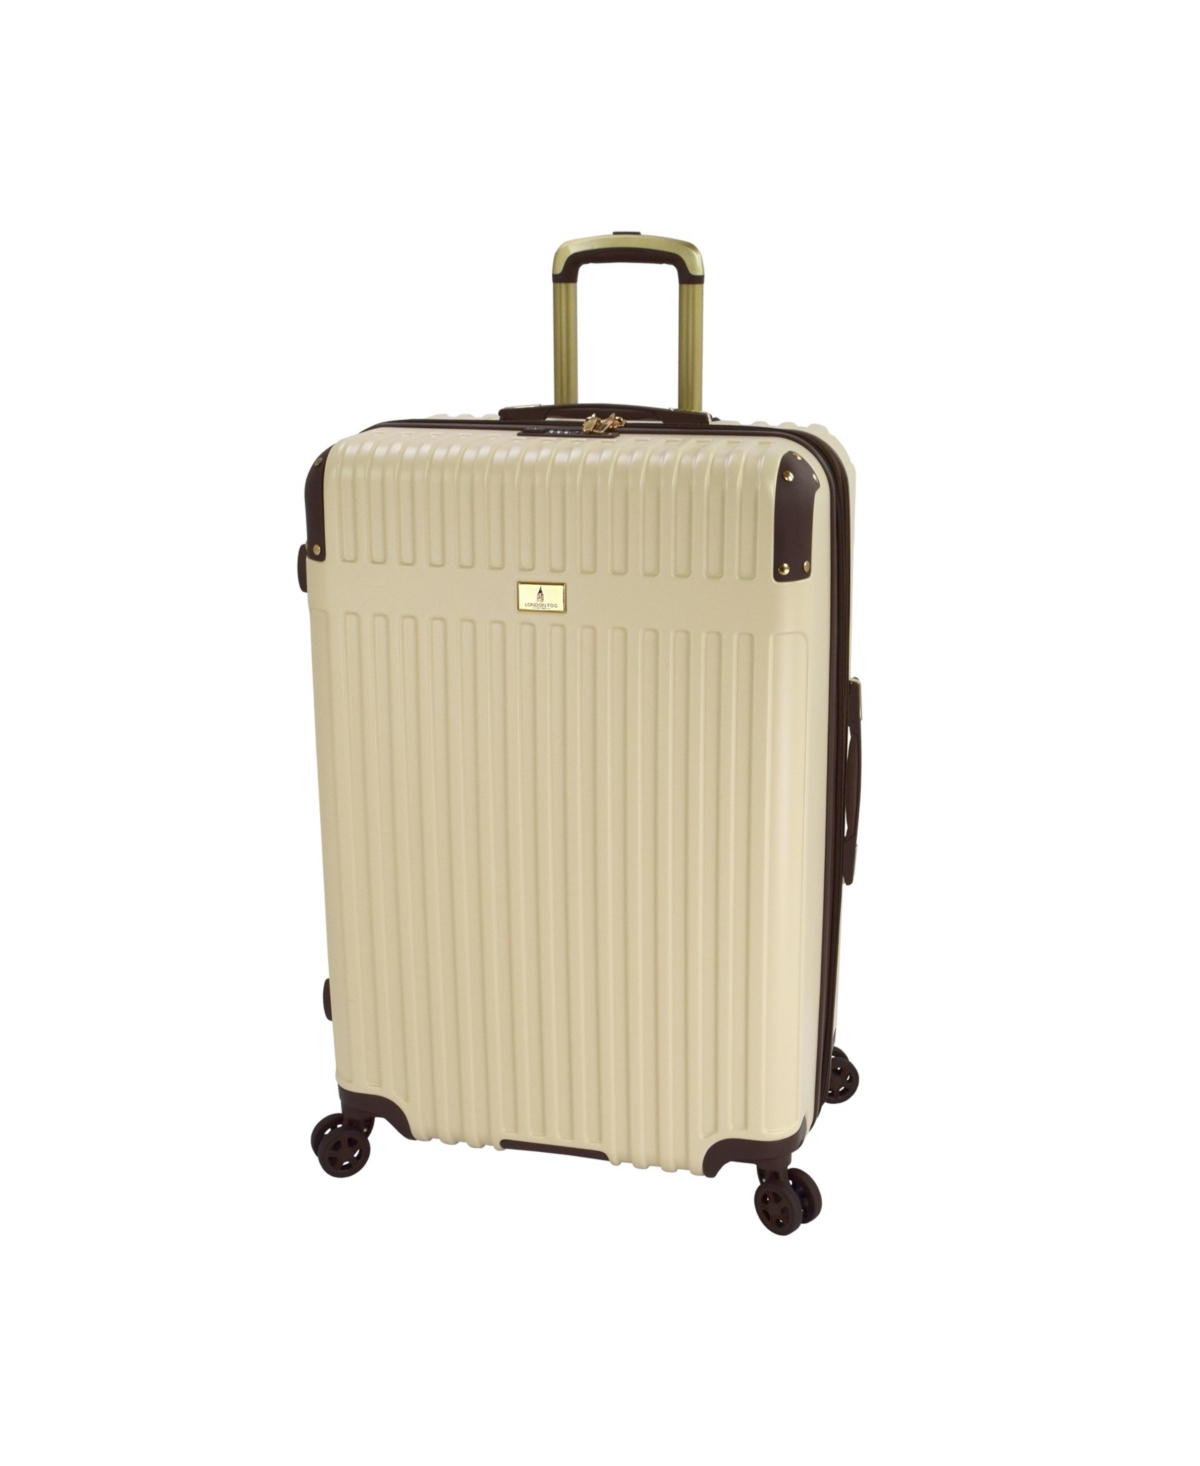 Brentwood Iii 29" Expandable Spinner Hardside, Created for Macy's - Navy